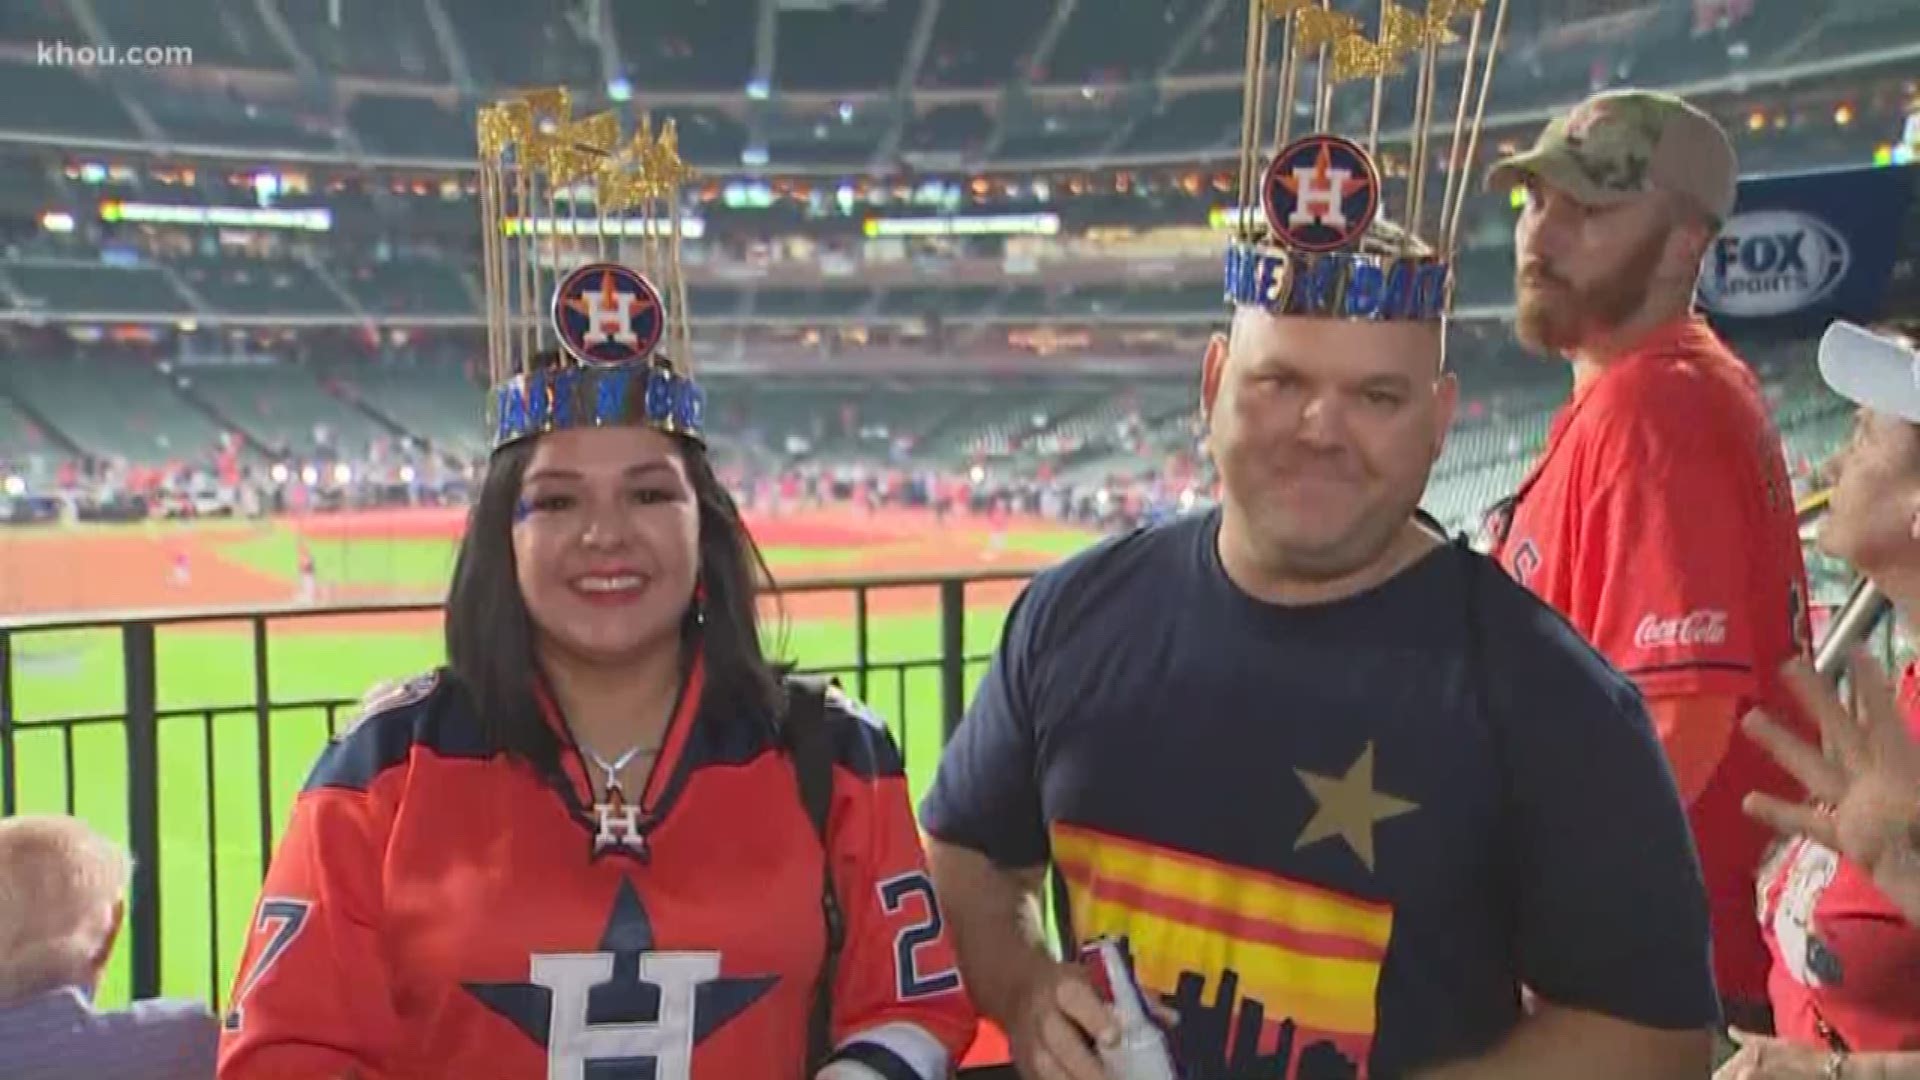 Leave it to Melissa Correa to find the coolest Astros fans!